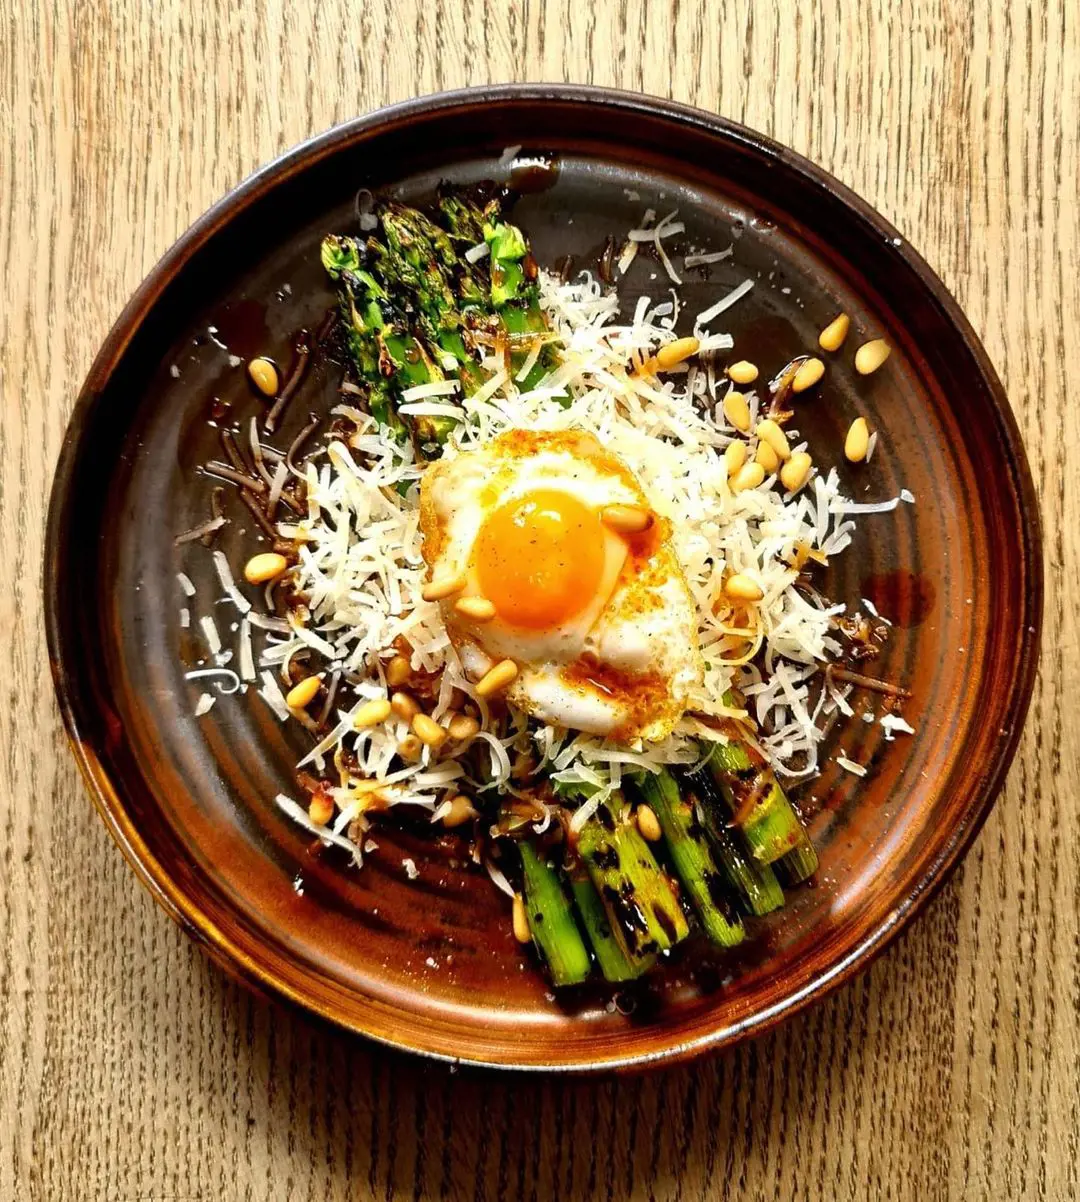 Grilled asparagus, manchego cheese, quail eggs, toasted pine nuts, paprika oil